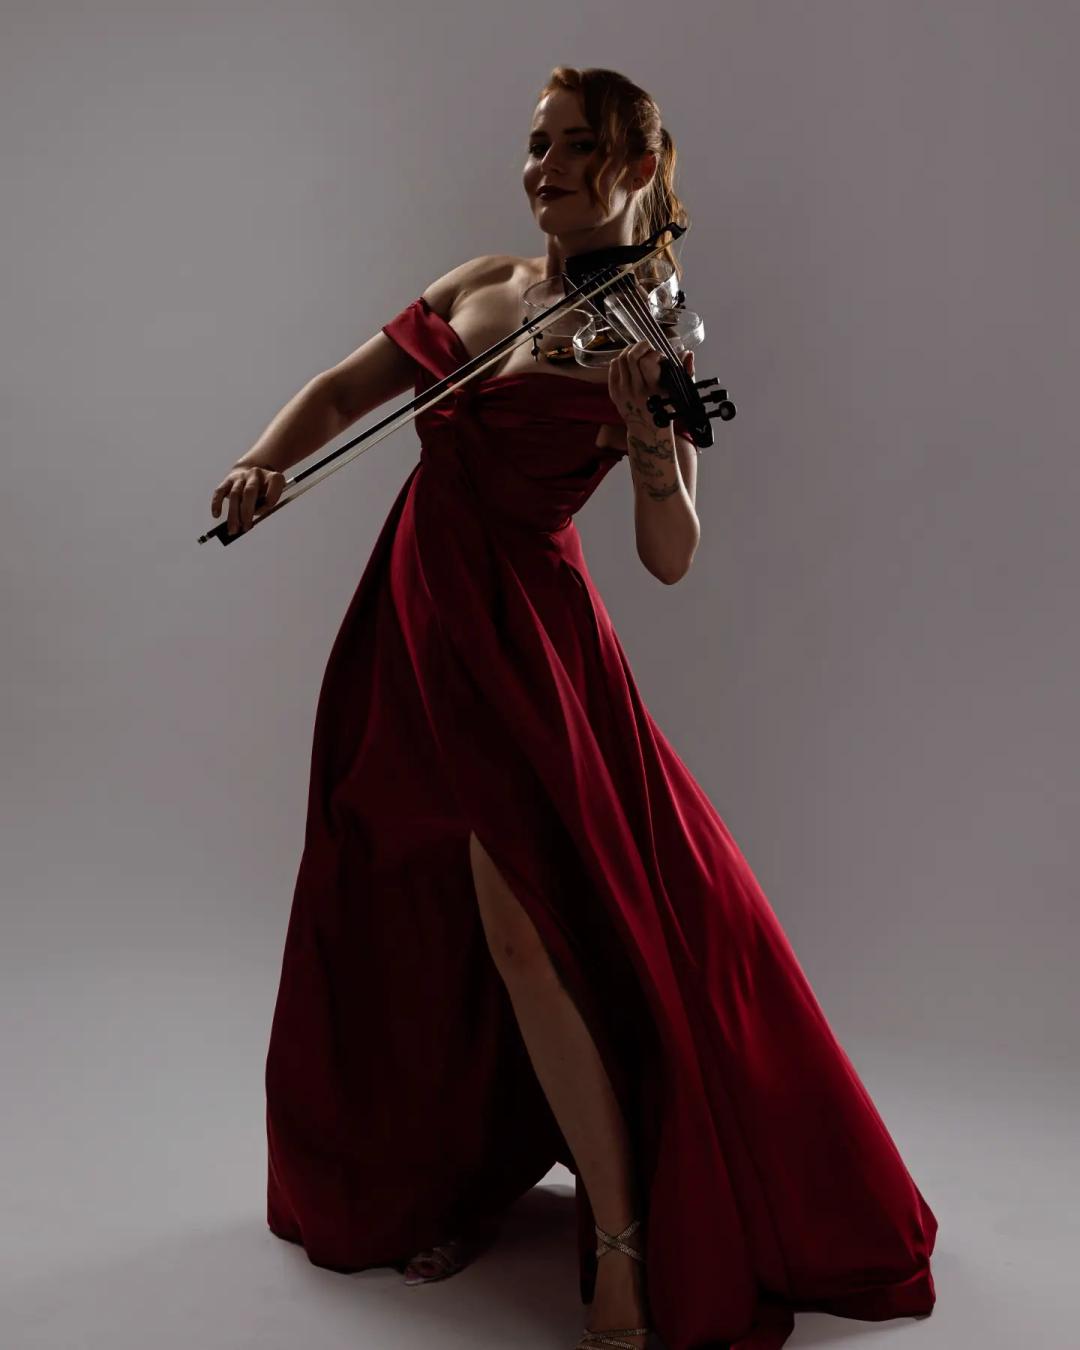 A woman in a beautiful red dress pretends to plays violin